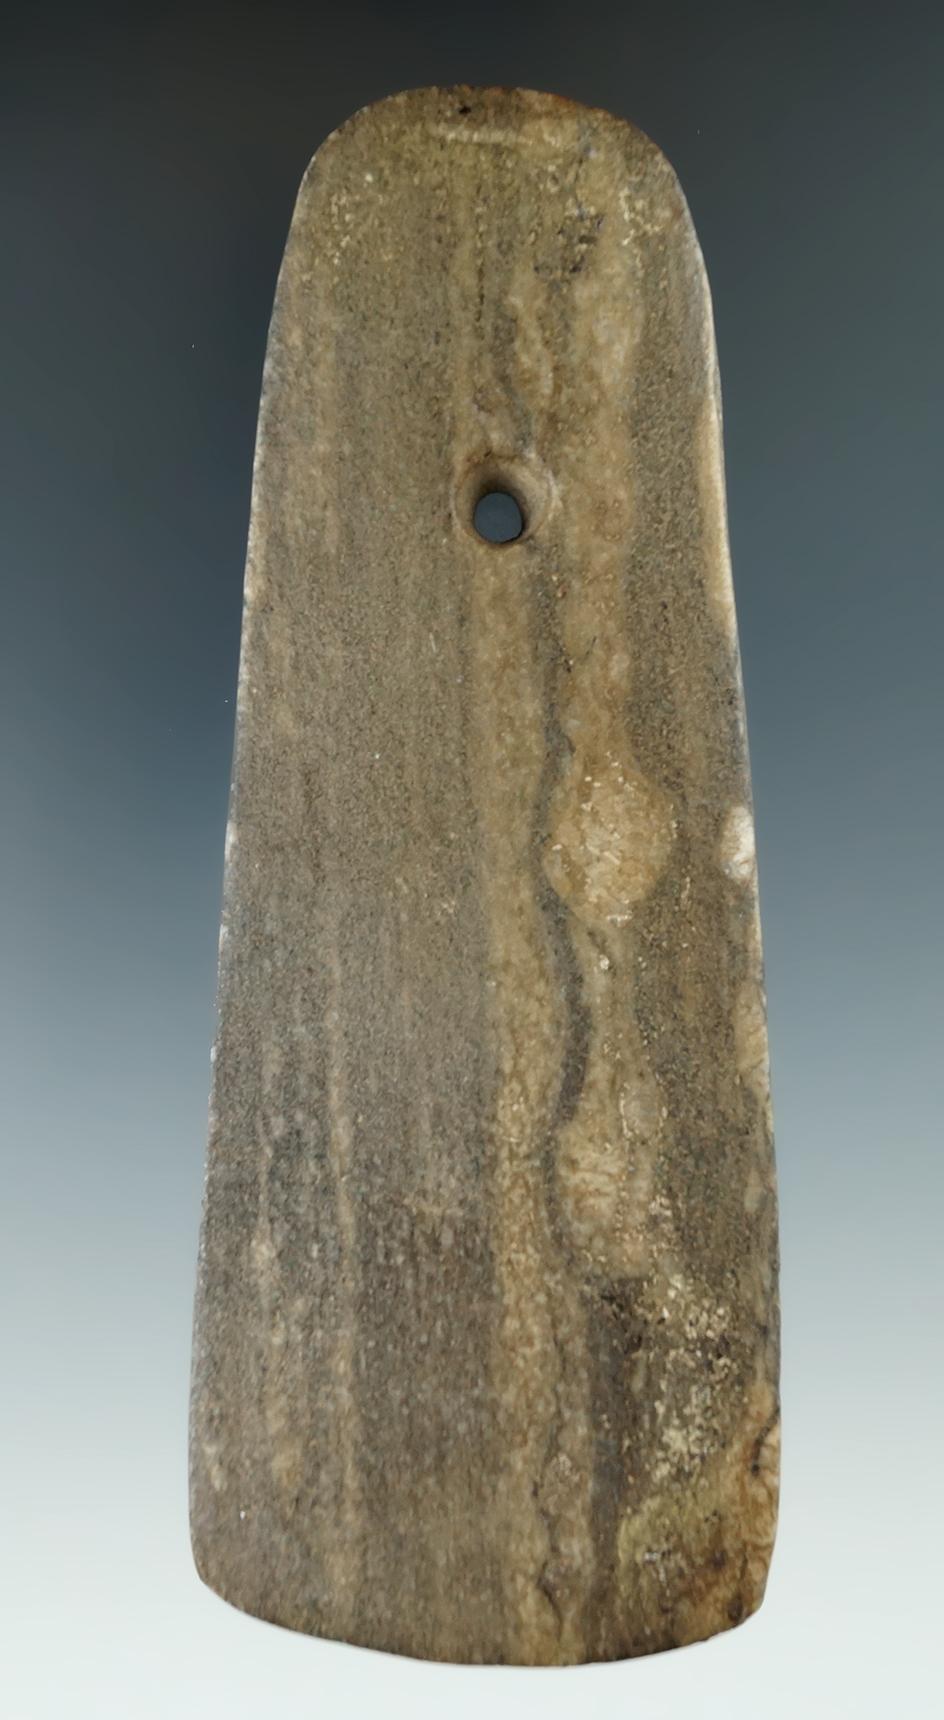 4 15/16" Trapezoidal Pendant made from Gneiss, found in Muskingum Co., Ohio.